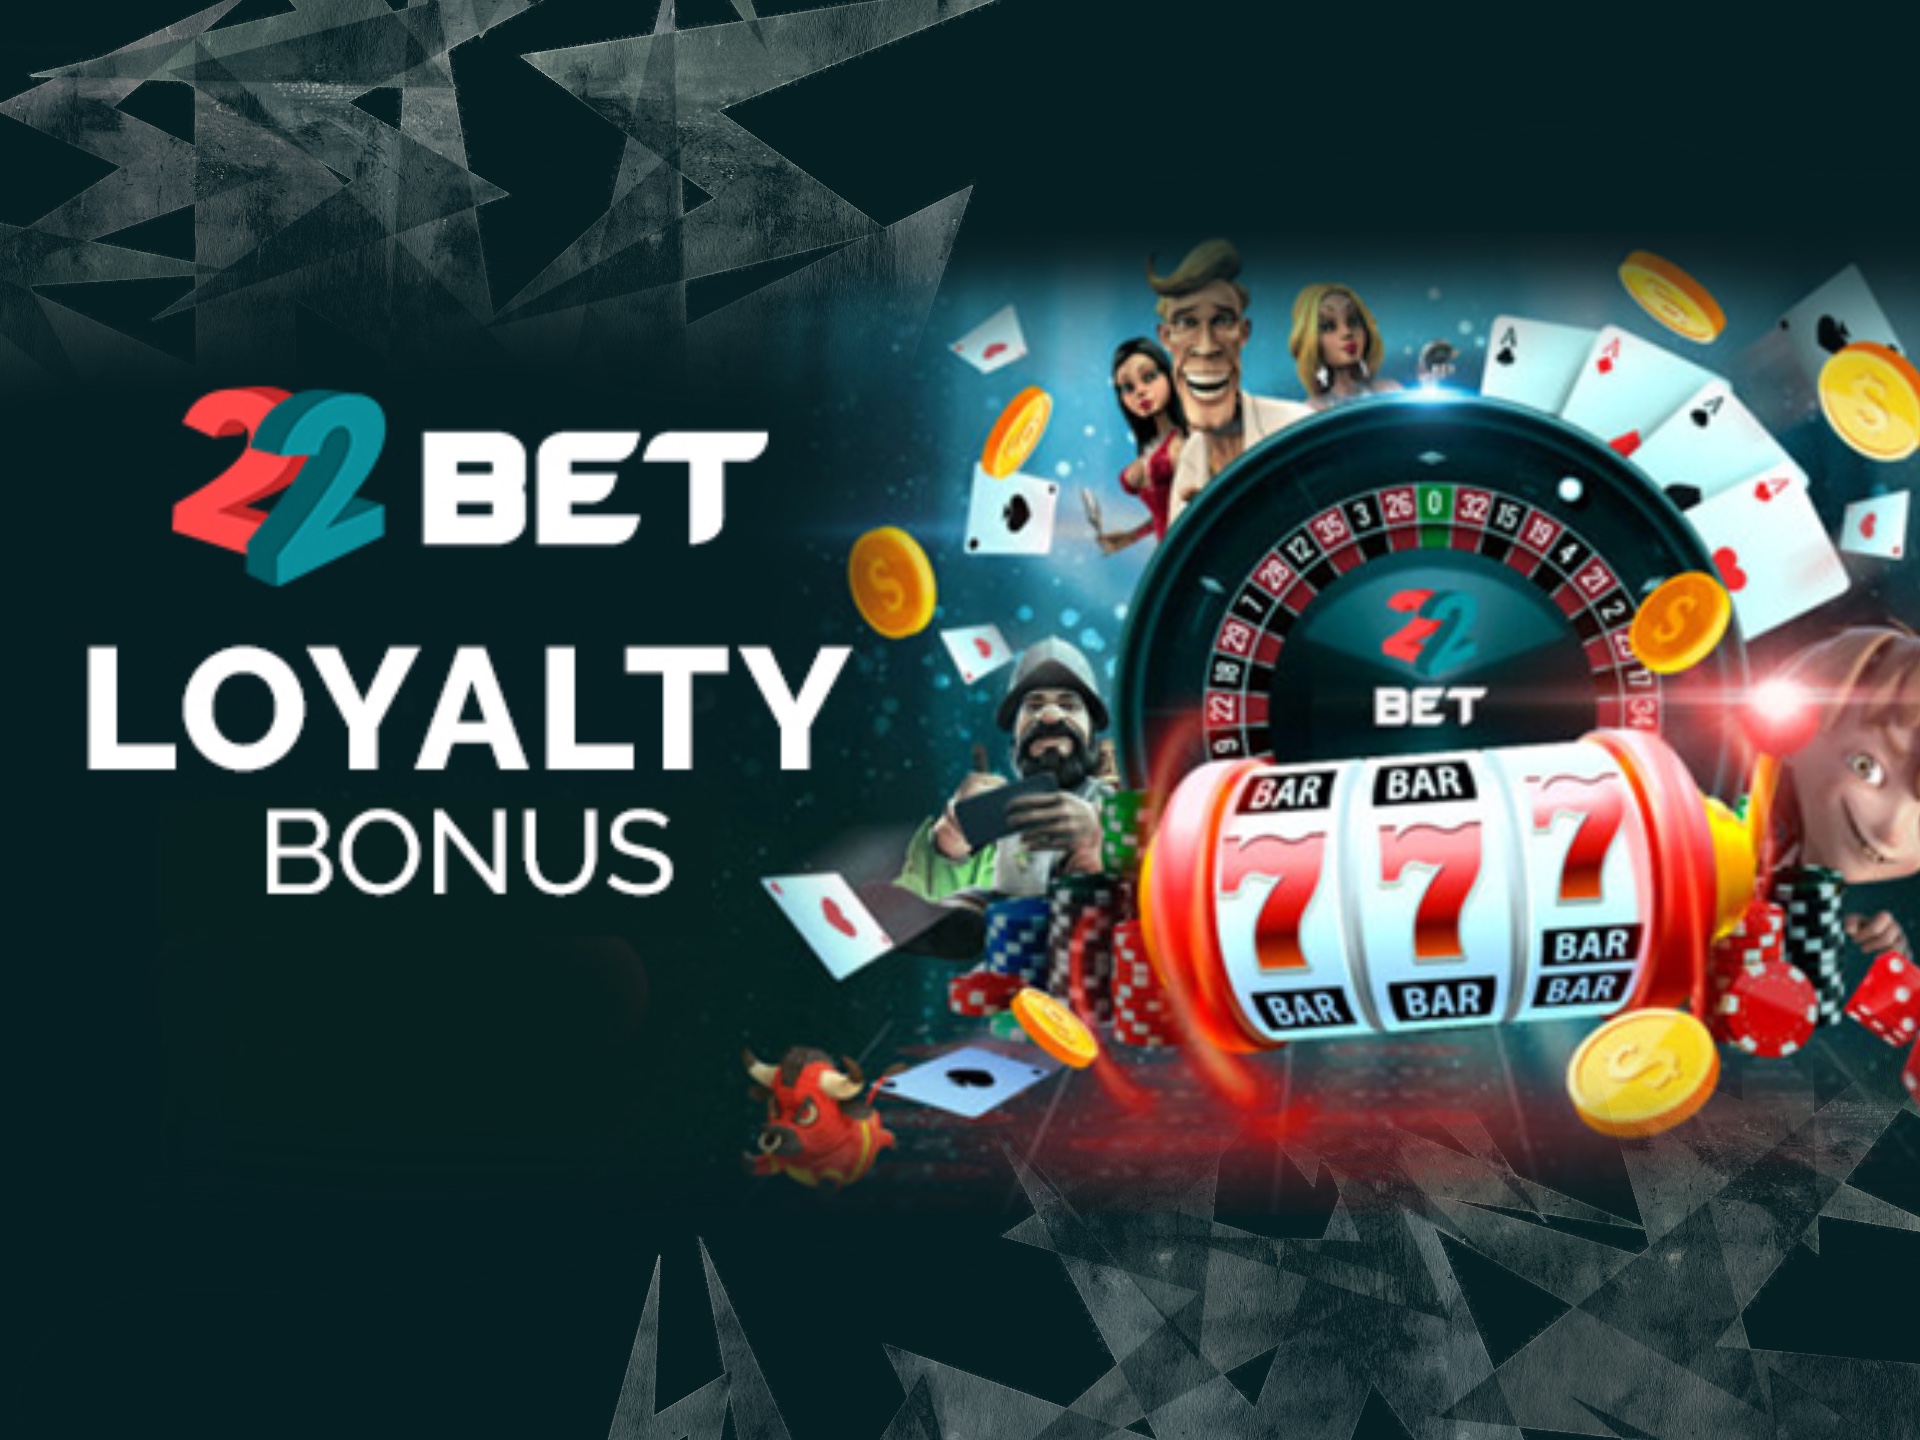 This bonus is for the loyal and regular online casino players.